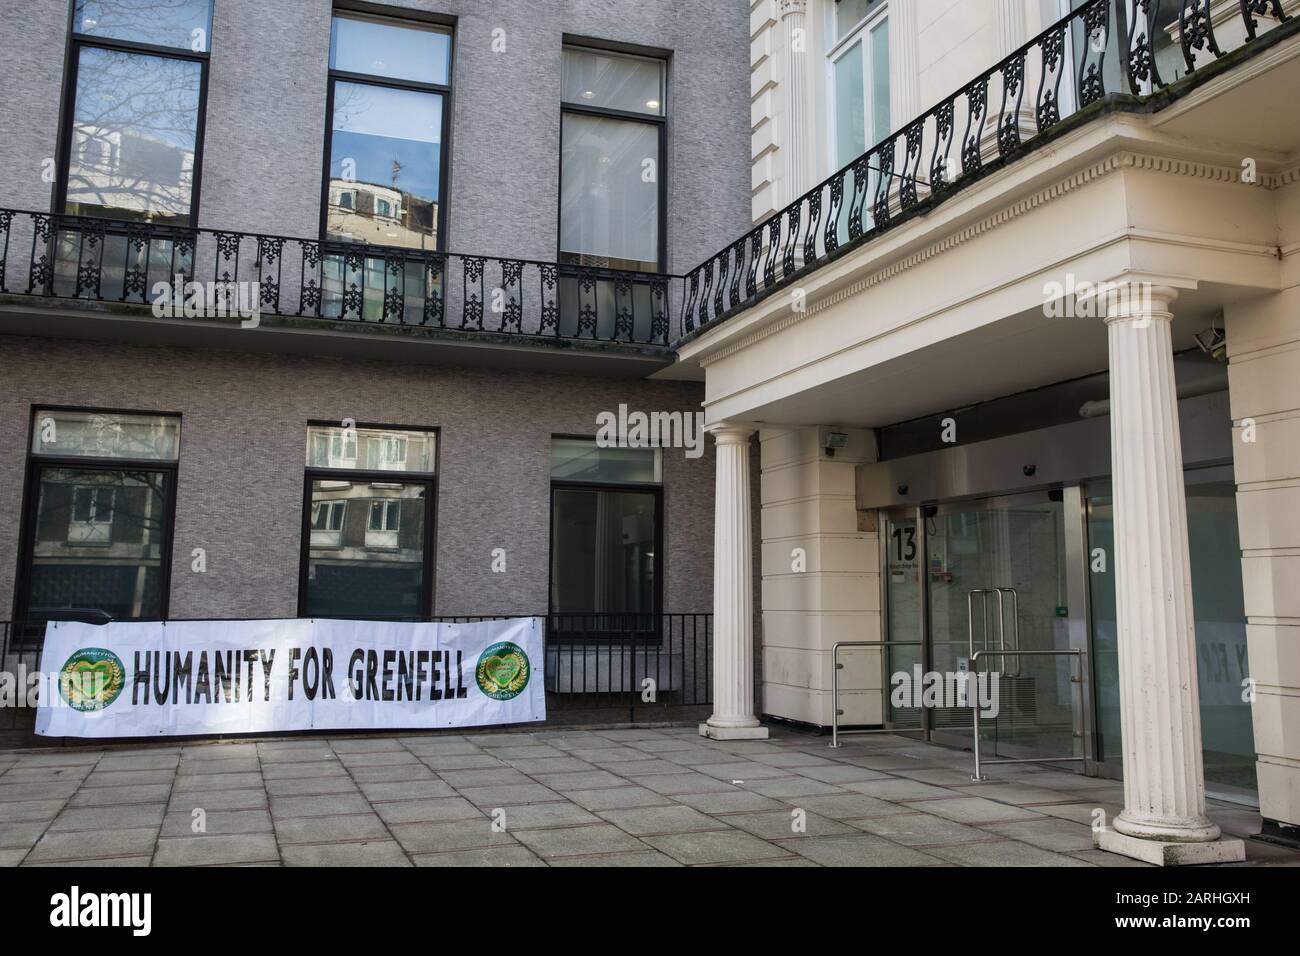 London, UK. 28 January, 2020. A banner bearing the words ‘Humanity for Grenfell’, the name of a community group formed to ‘ensure truth, justice and restitution for all bereaved relatives and survivors of the Grenfell Tower fire’, is displayed outside the venue in Paddington for the second stage of the Grenfell Inquiry which will consider how the high-rise block came to be covered in flammable materials. Credit: Mark Kerrison/Alamy Live News Stock Photo